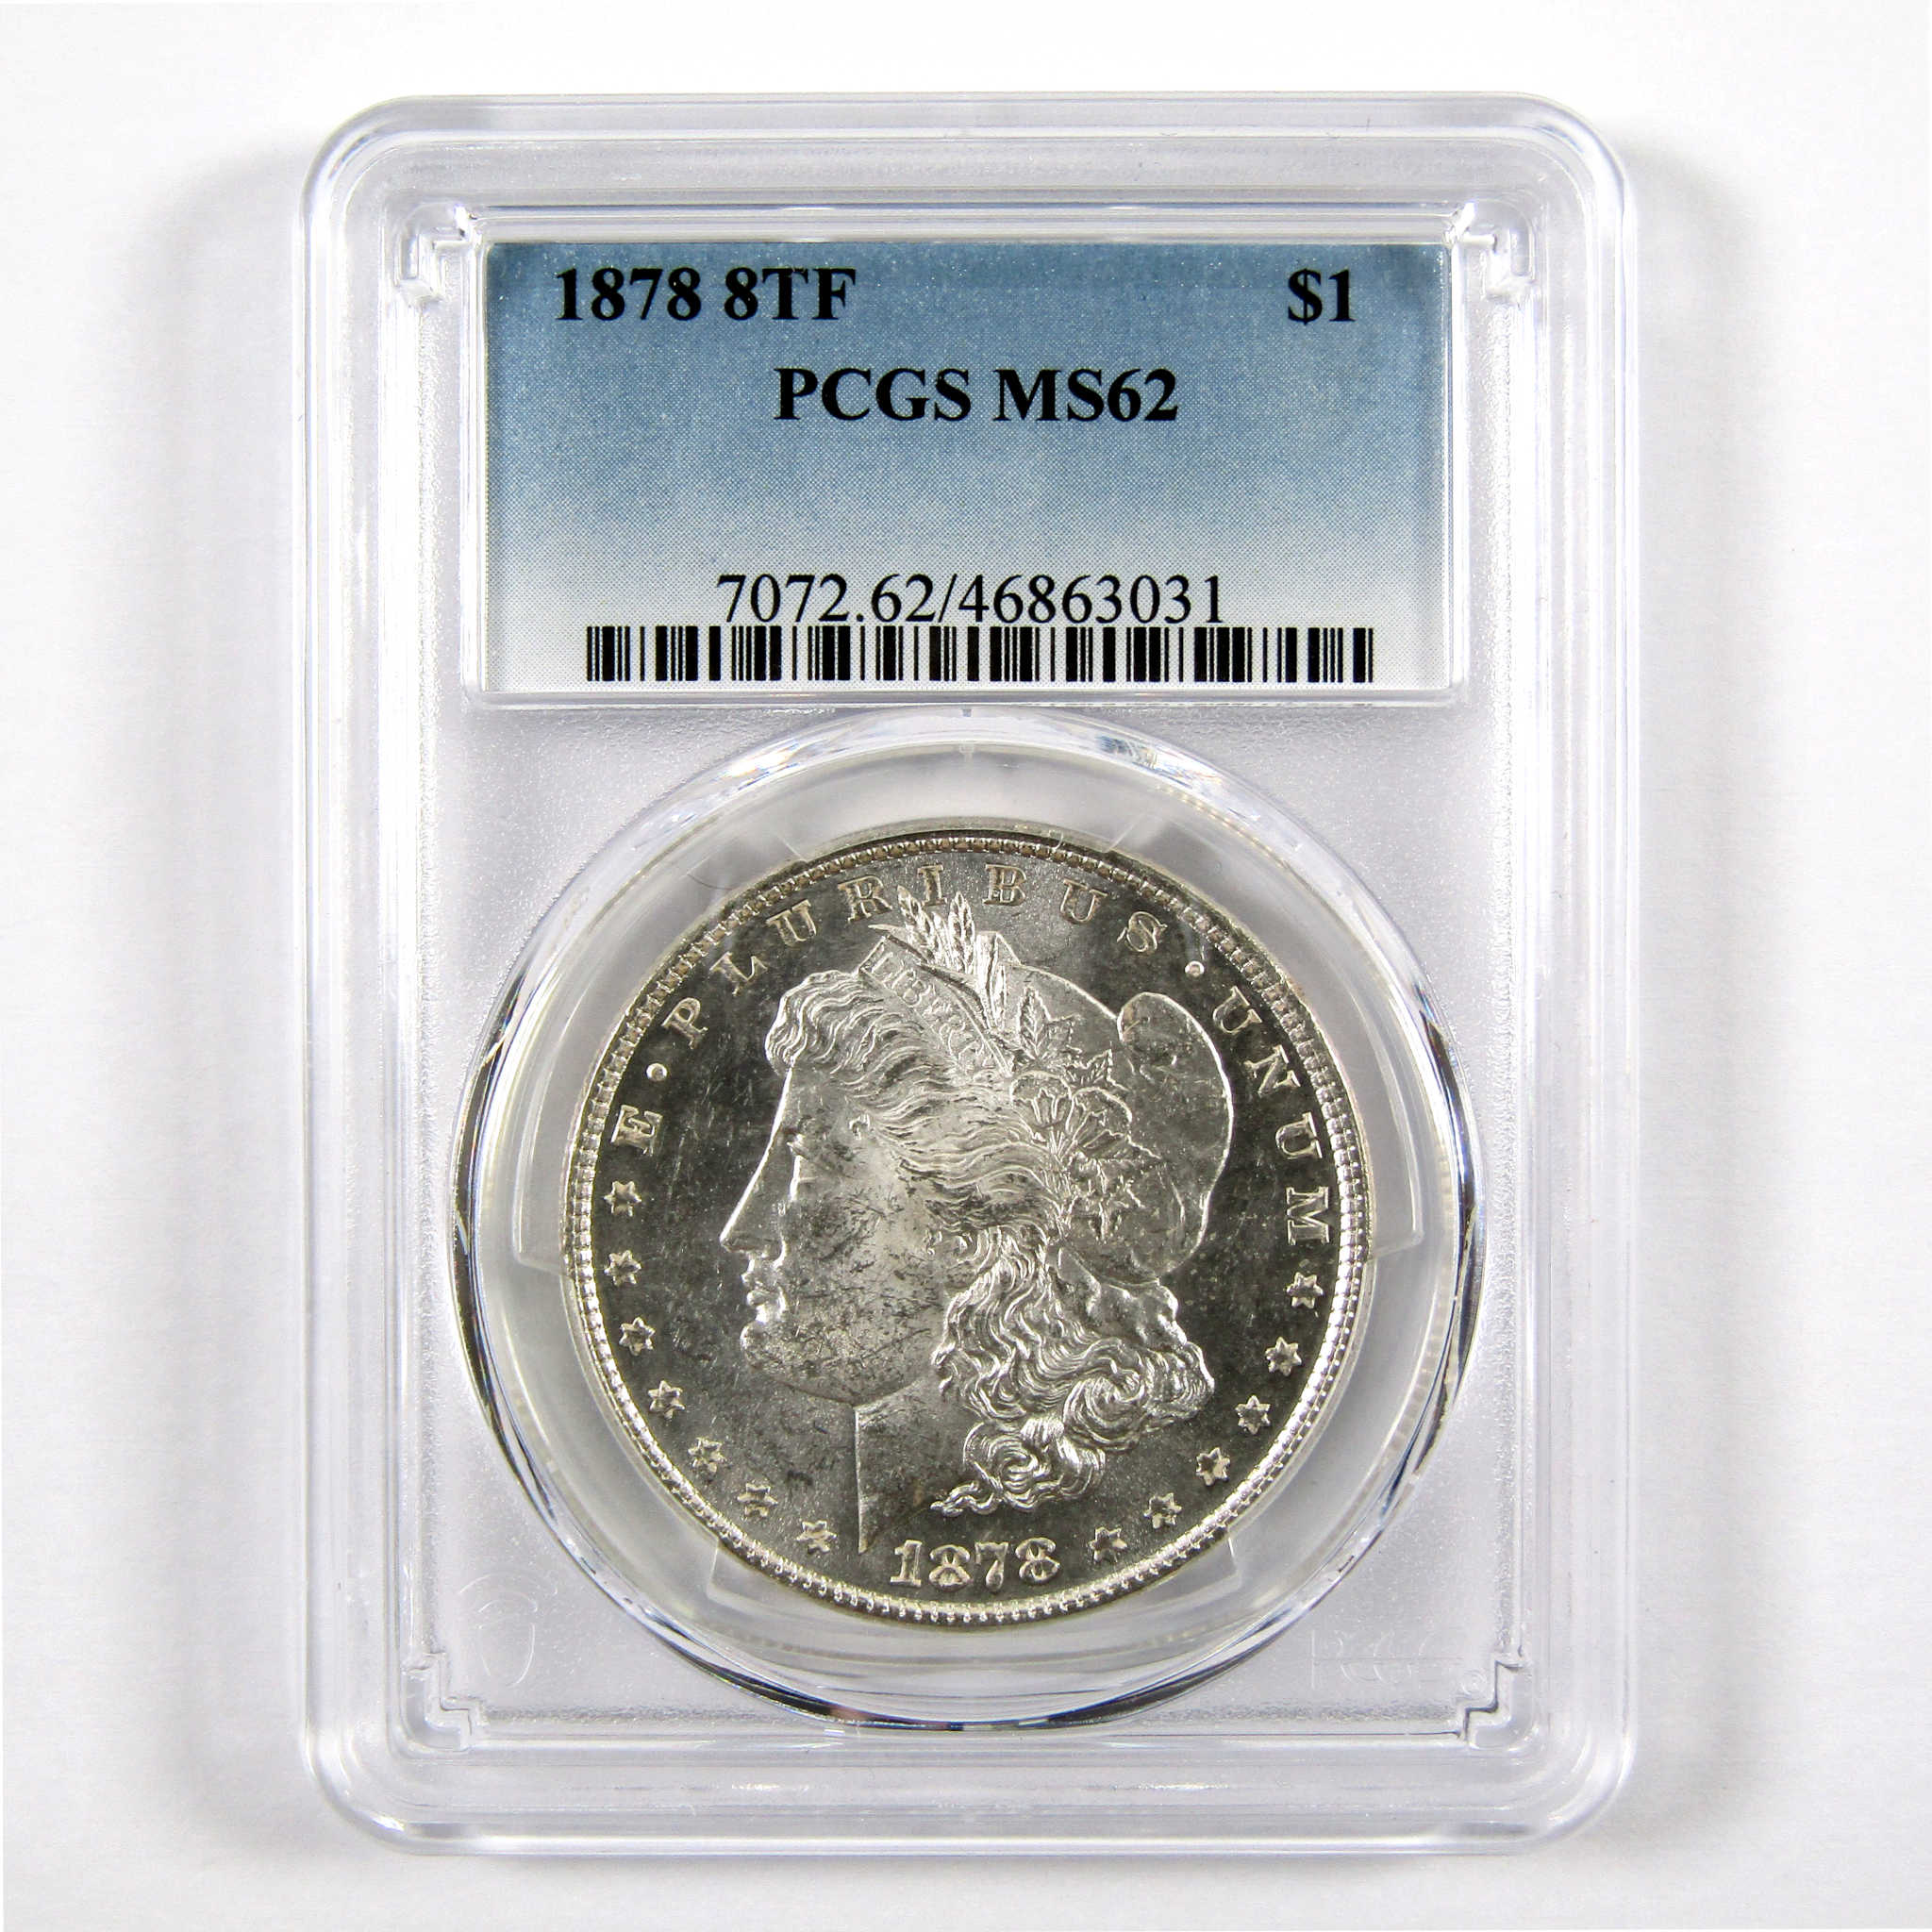 1878 8TF Morgan Dollar MS 62 PCGS 90% Silver $1 Unc SKU:I10459 - Morgan coin - Morgan silver dollar - Morgan silver dollar for sale - Profile Coins &amp; Collectibles